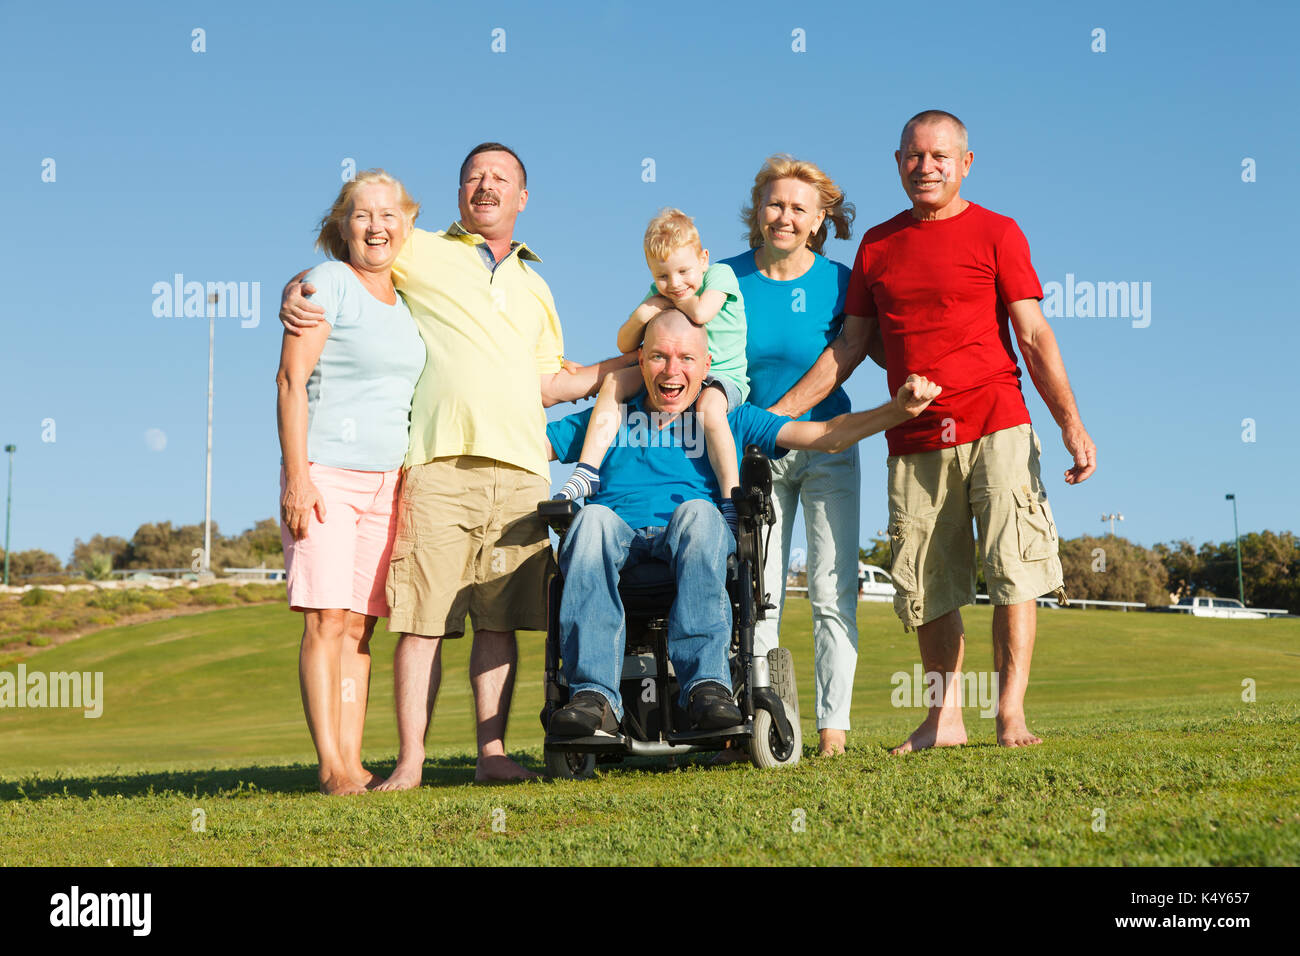 Disabled man with family outside showing unity. Stock Photo